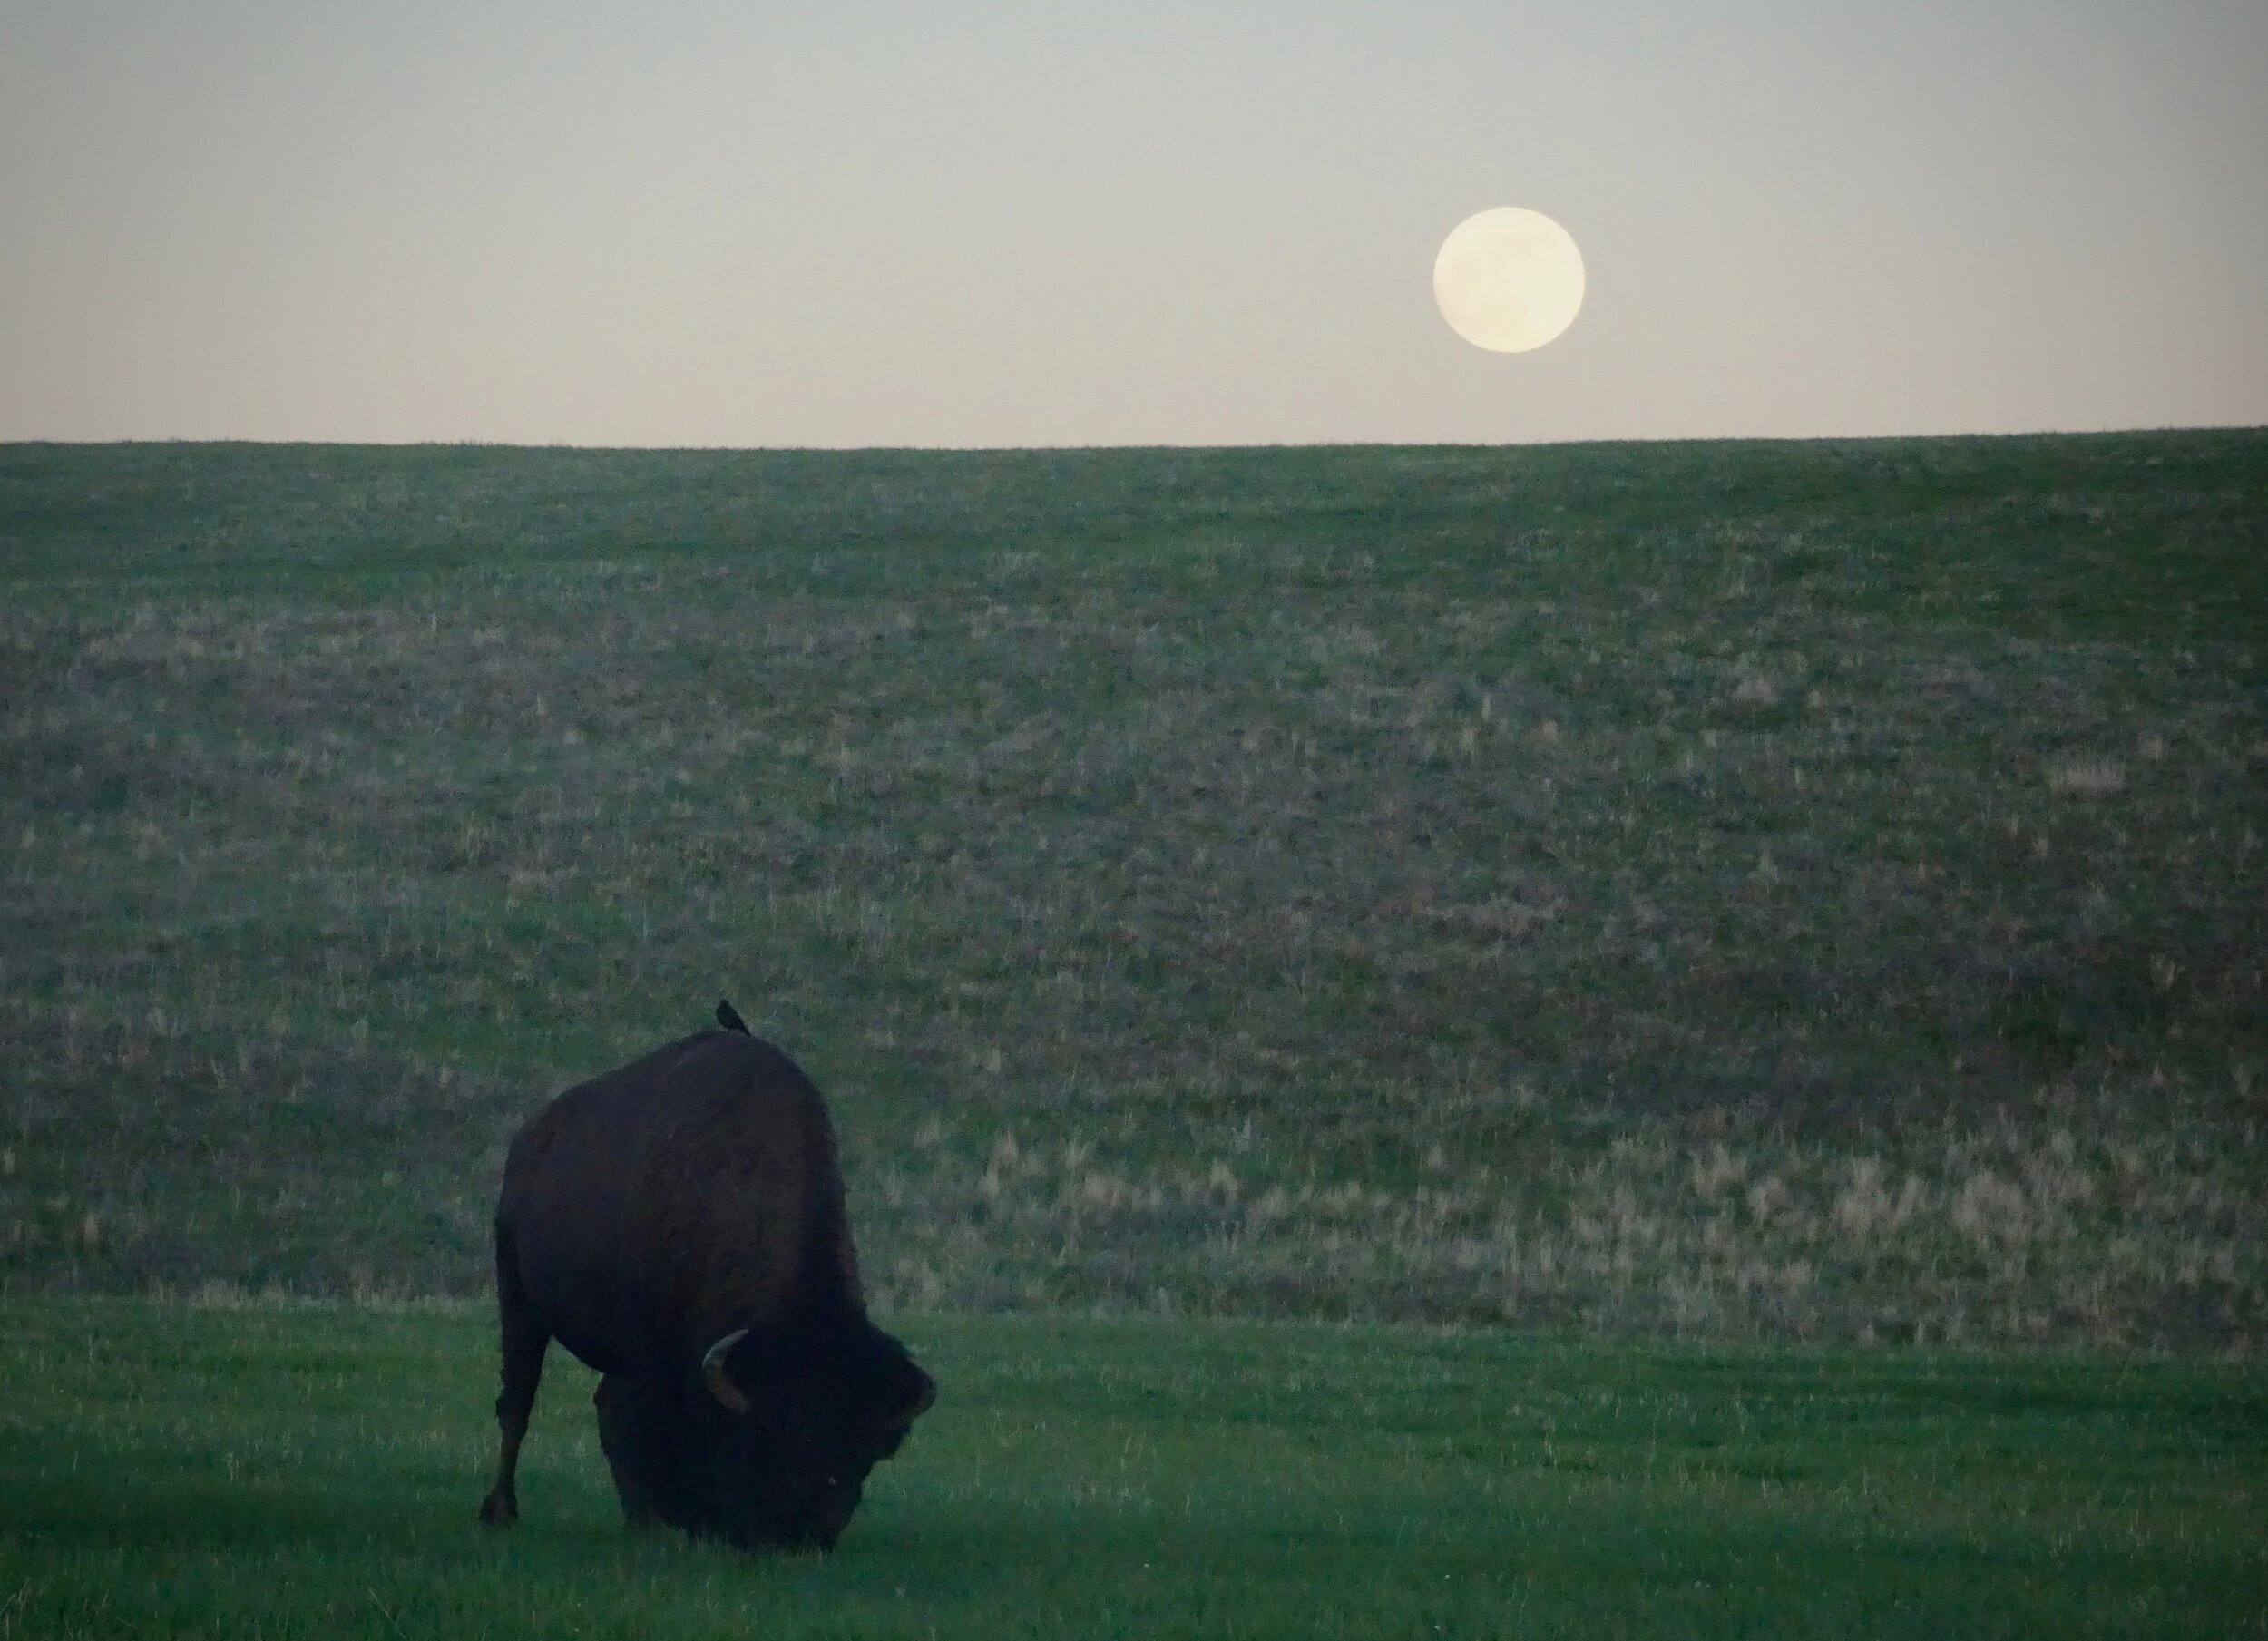 Bison (with hitchhiking bird) in the rising full moon in Custer State Park, SD  Photo by Karen Boudreaux, 5/25/21